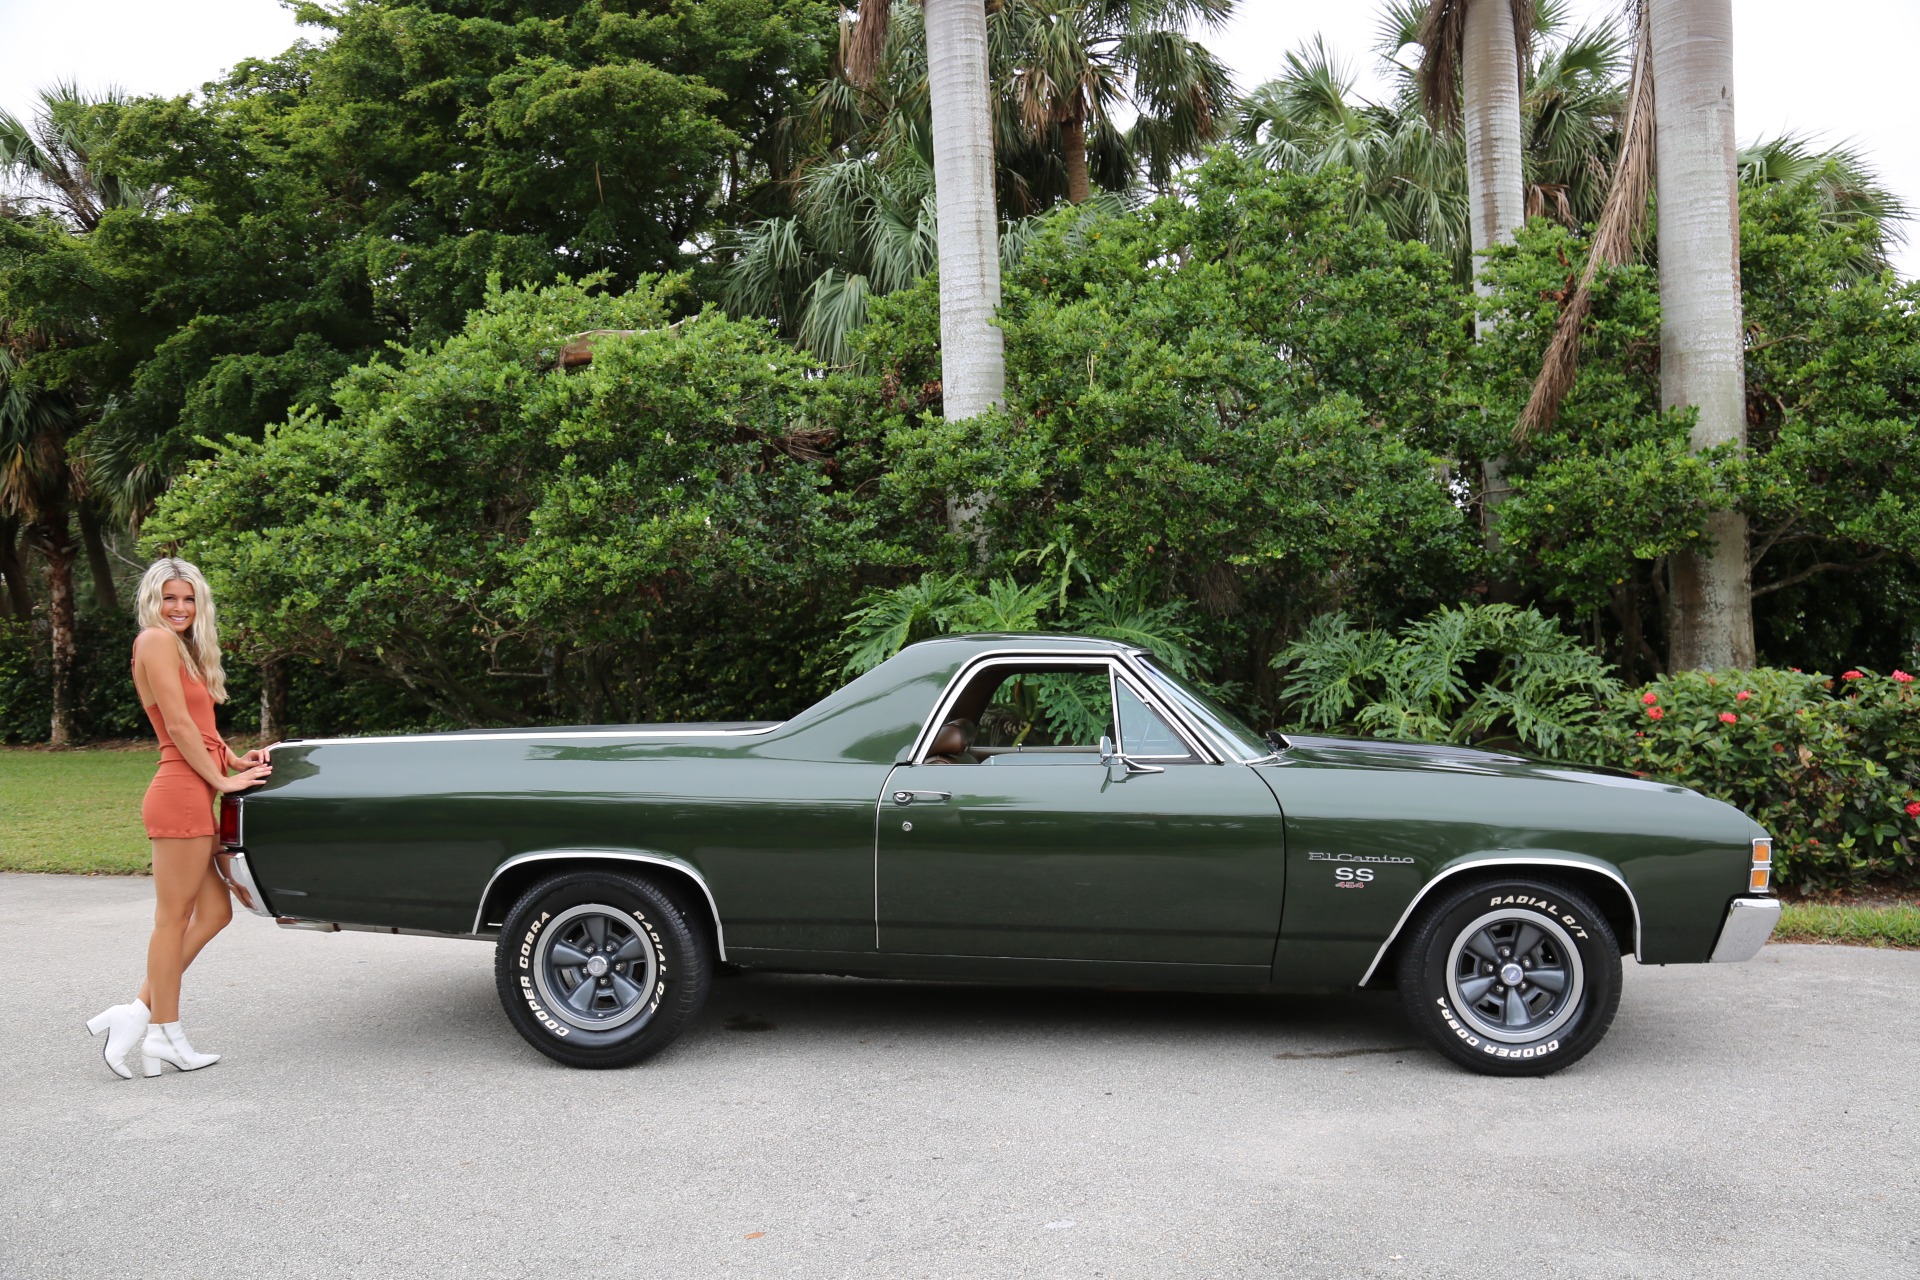 Used 1971 Chevrolet ElCamino SS SS Super Sport for sale Sold at Muscle Cars for Sale Inc. in Fort Myers FL 33912 5